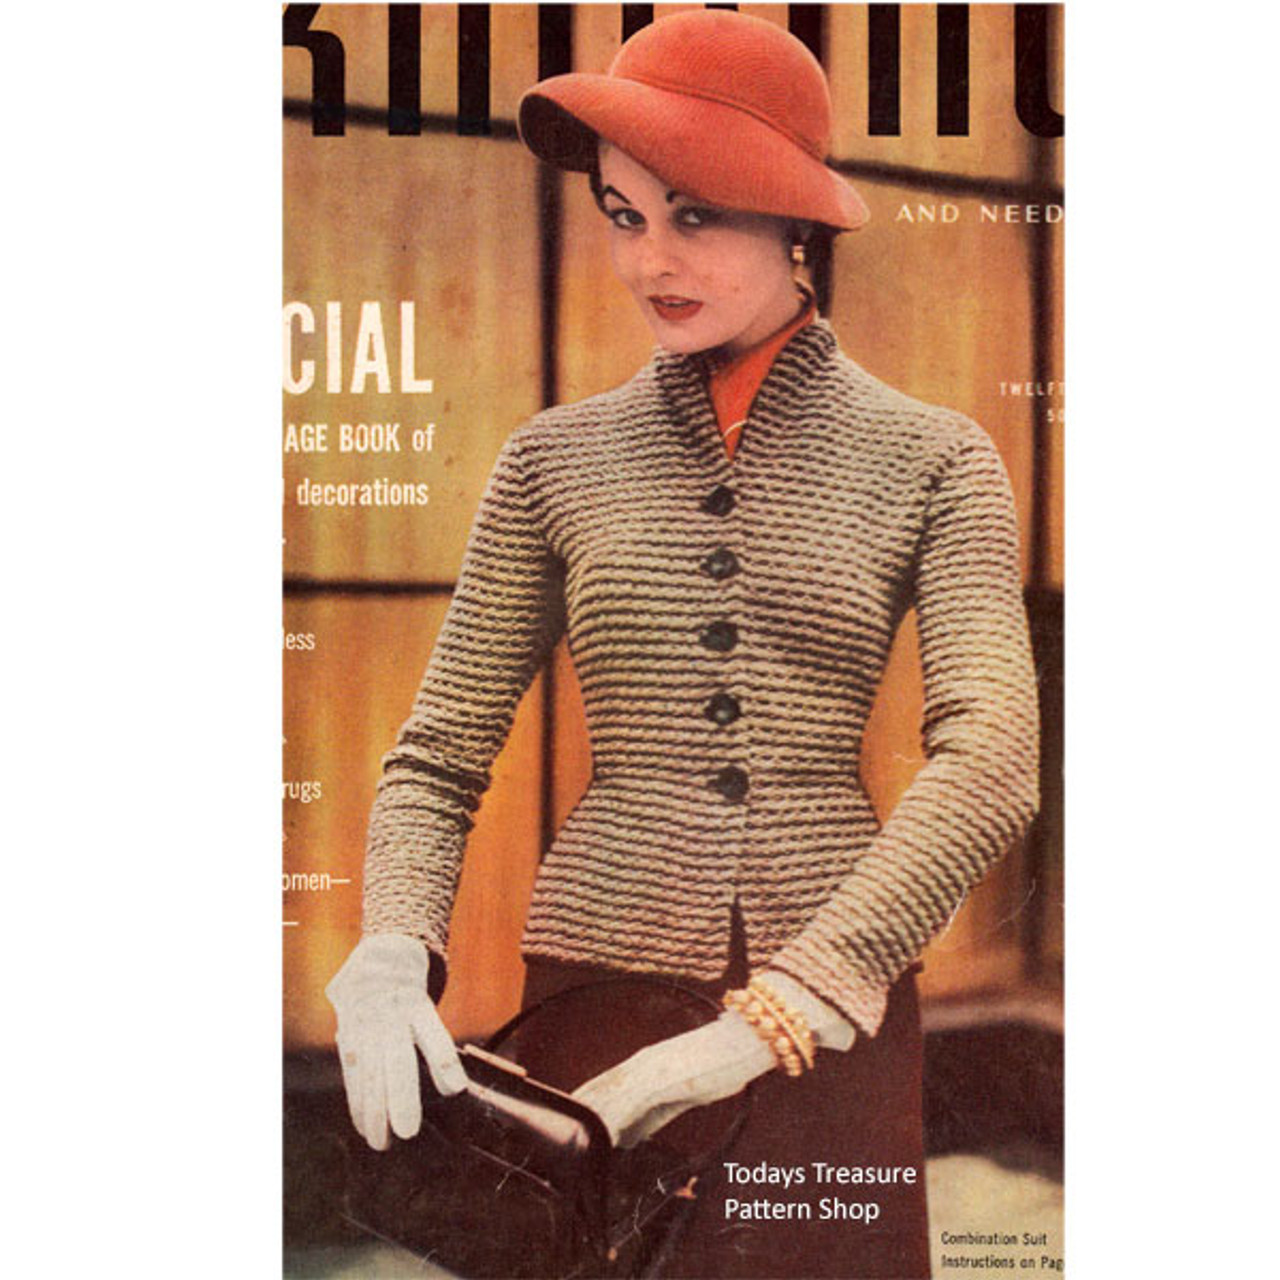 Fitted Suit Knitting Pattern